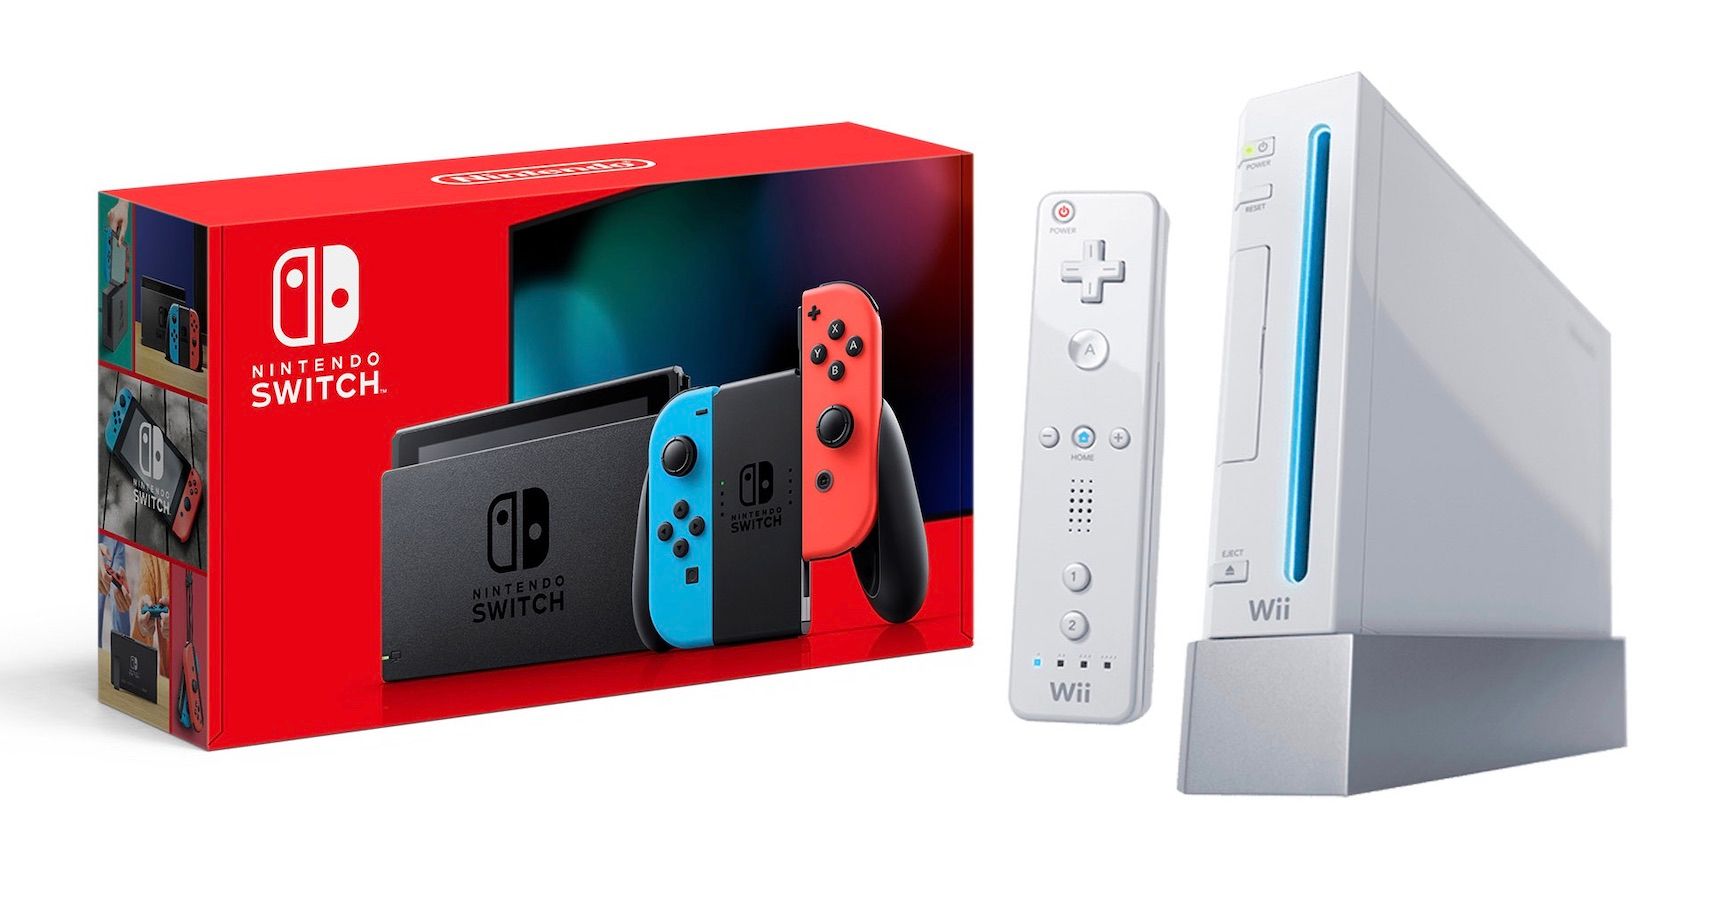 Nintendo Switch Has Surpassed The Wii's Lifetime Sales In The US